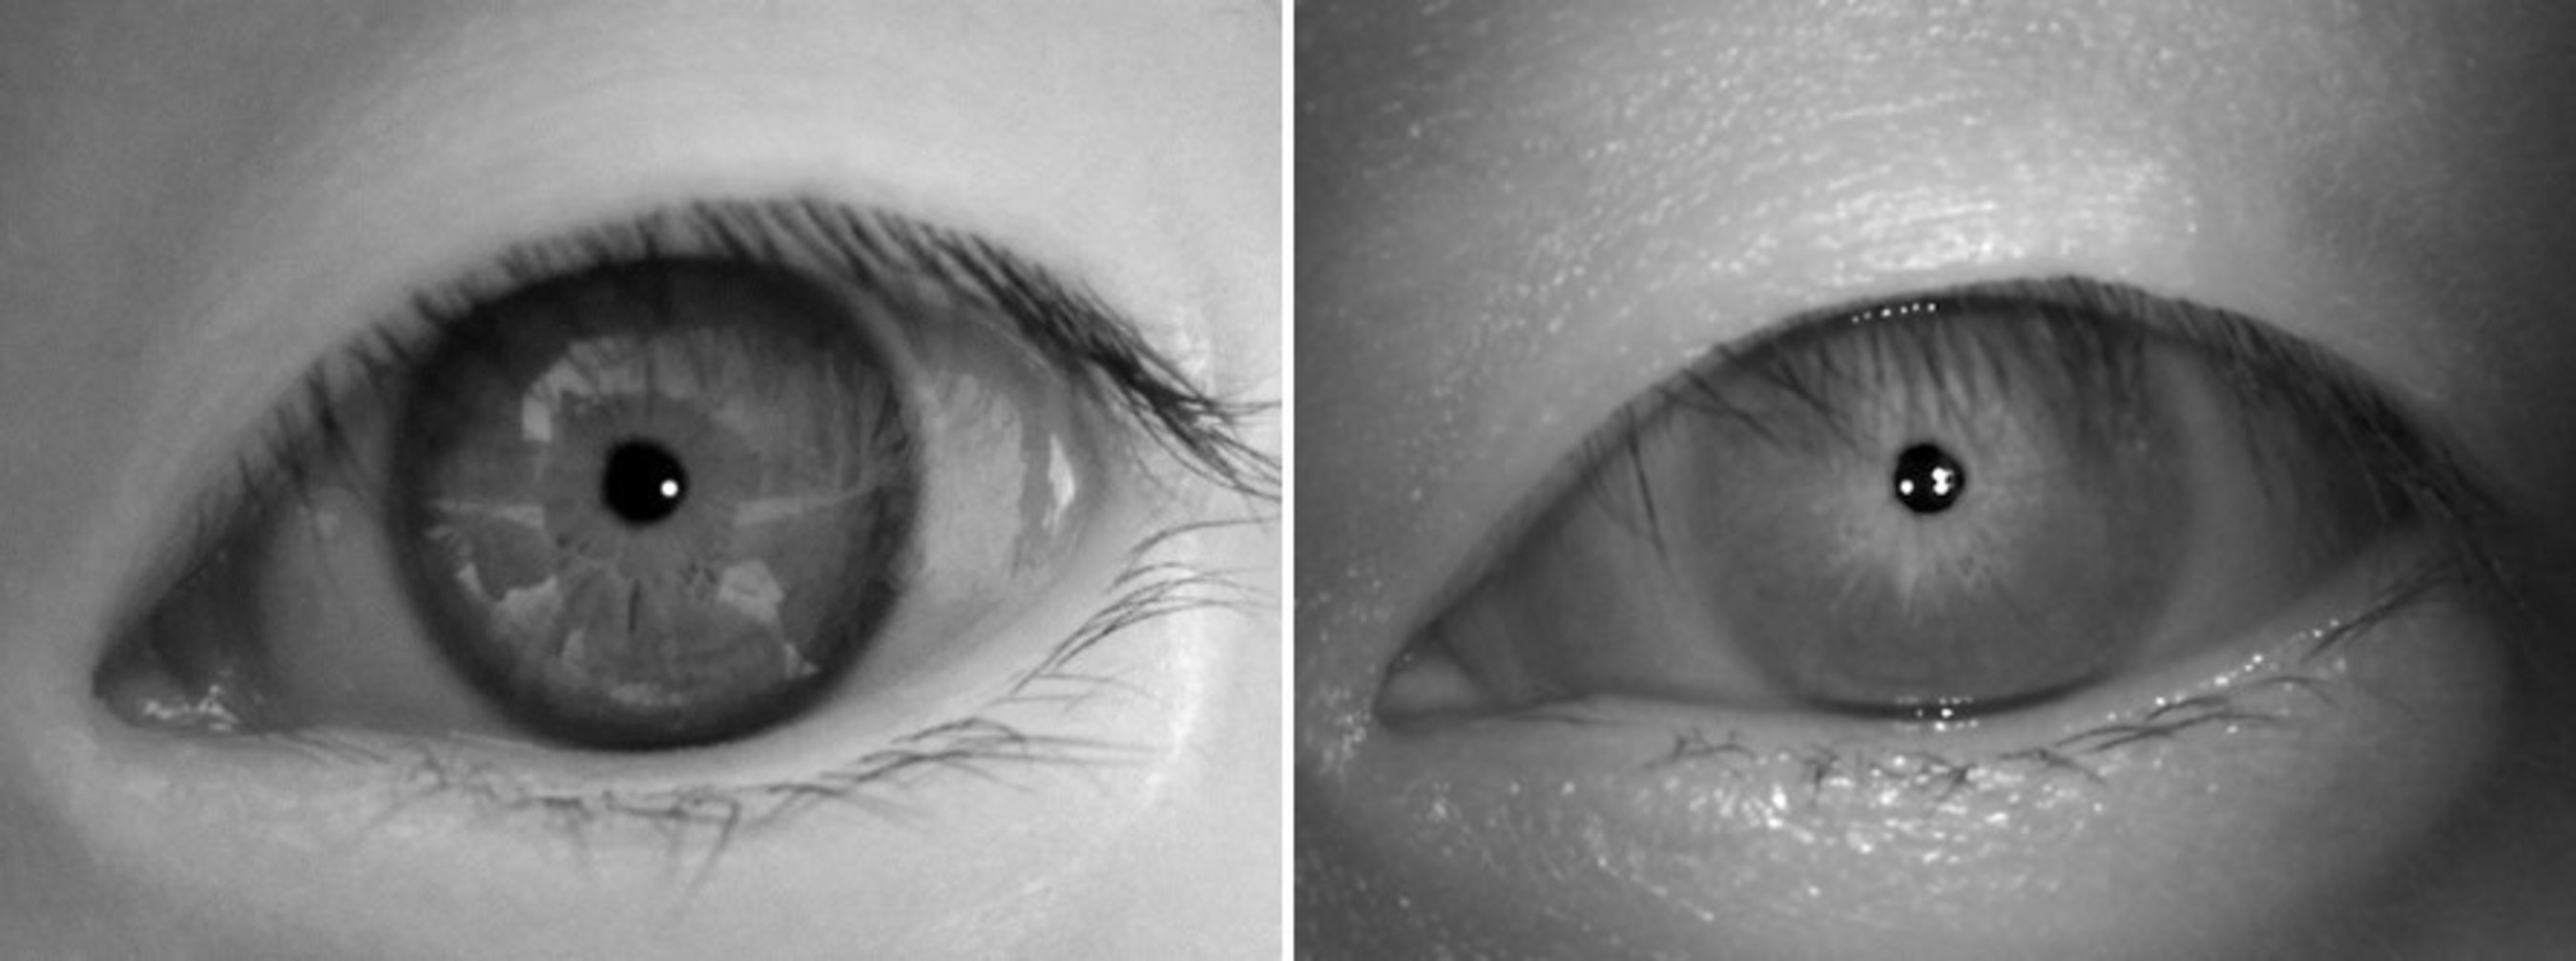 Left and right images are taken under identical environments of more thanover 100,000 lux. The left iris image was captured with a conventional iris camera, whereas the right image was with IriTech's outdoor capturing technology integrated camera. The left iris image shows reflections that will likely degrade the matching accuracy, whereas the right image does not have any reflections.